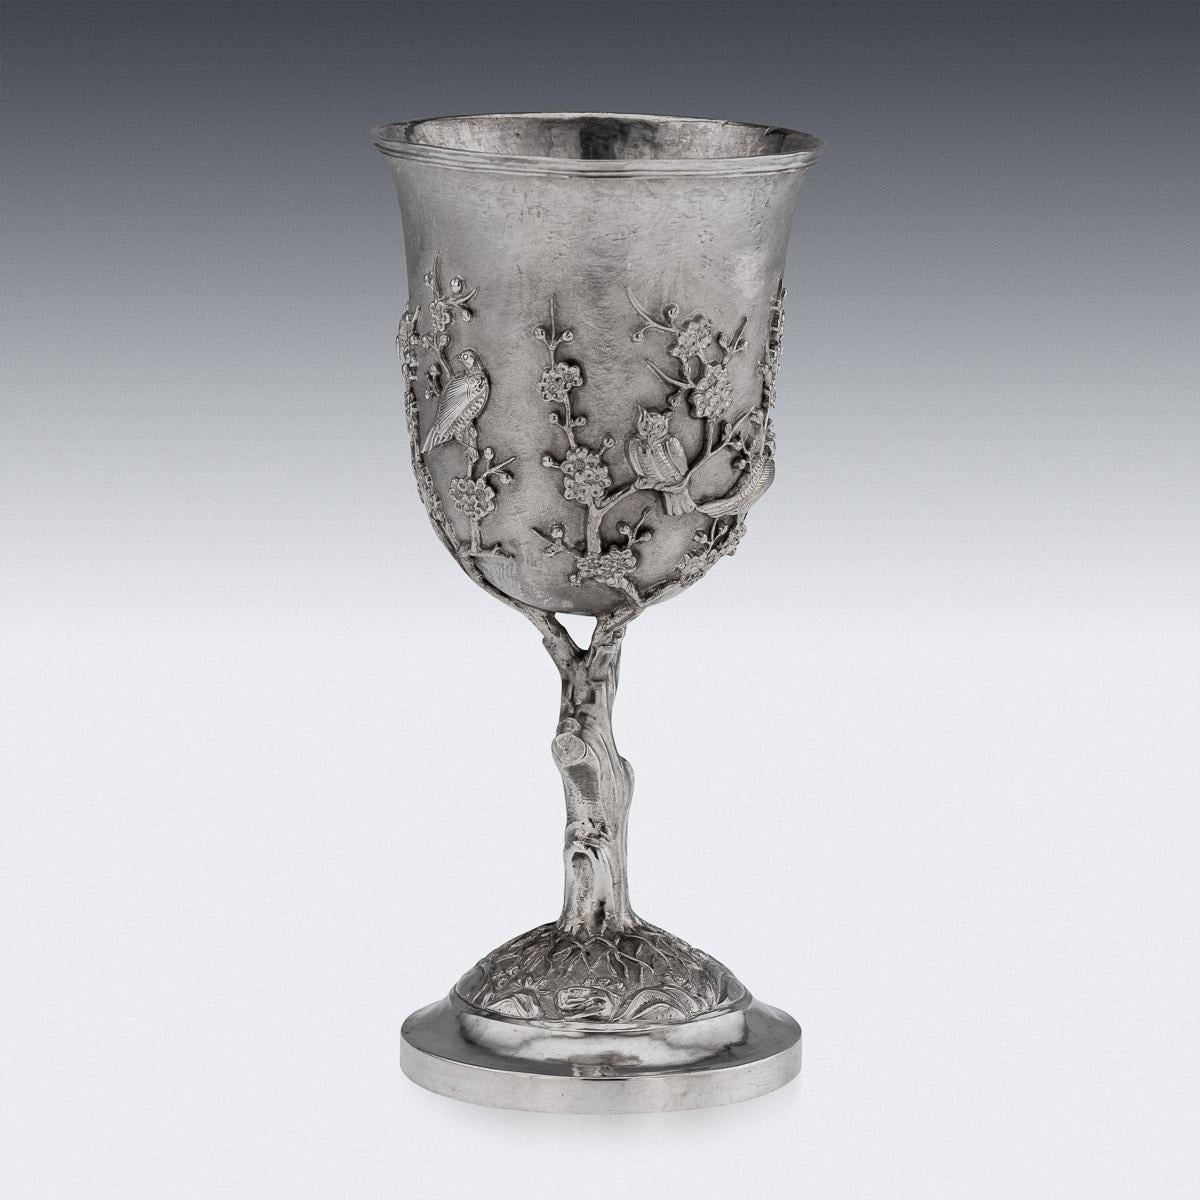 Antique mid 19th Century Chinese export solid silver wine goblet, impressive and exceptionally fine quality, double walled, applied with prunus flowers and exotic birds perching on branches, standing on domed foot and realistically modelled tree